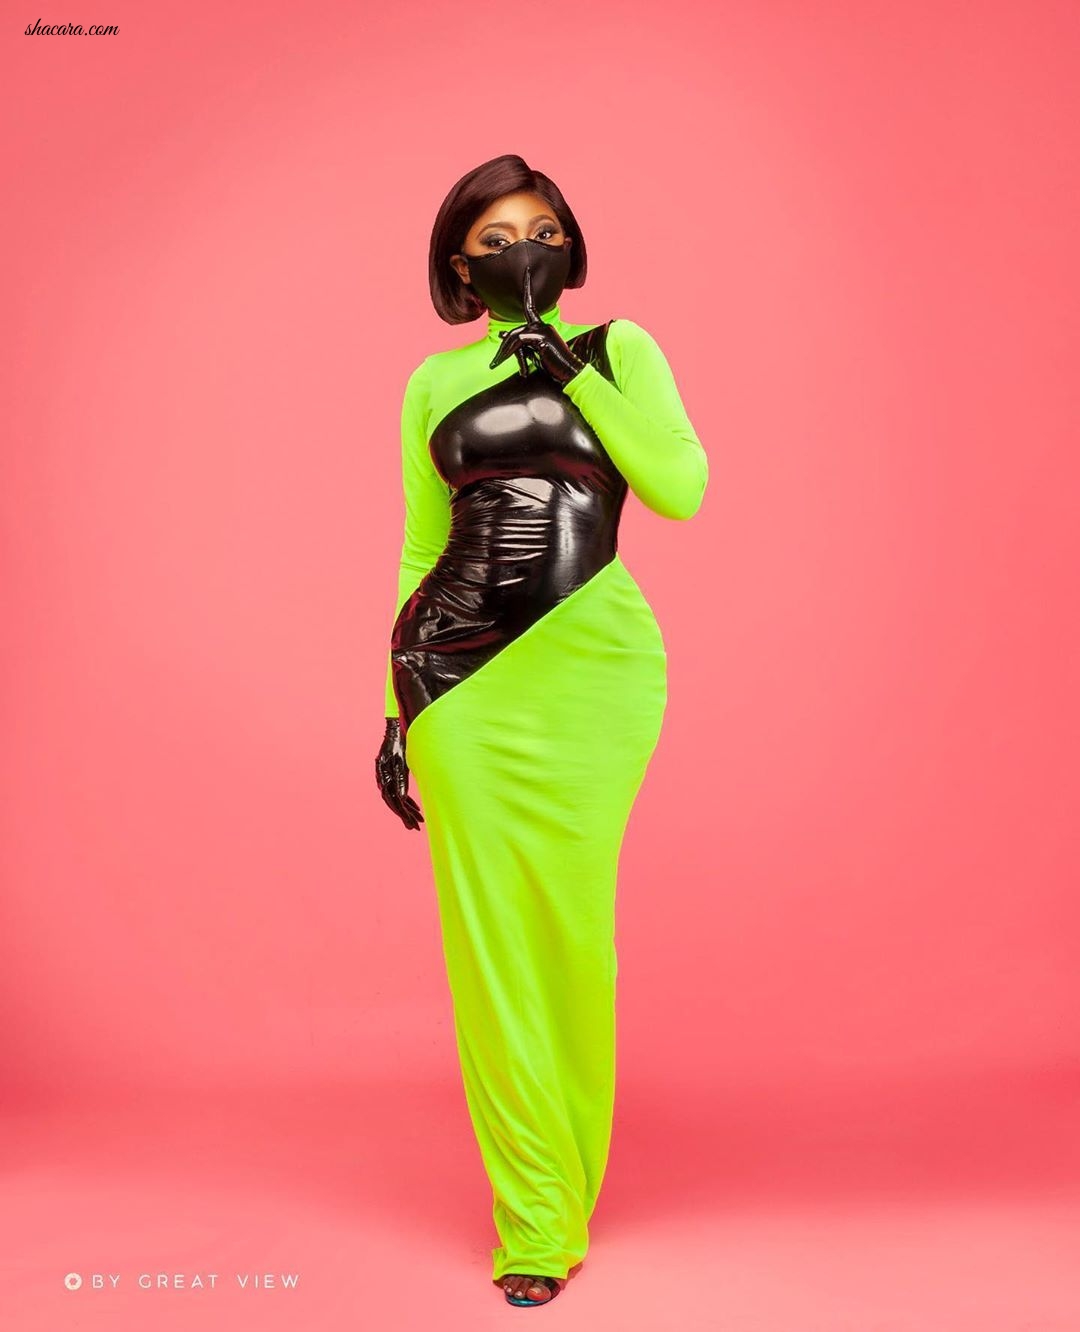 Yvonne Jegede Is Out Here Playing Dress Up In Quarantine-Inspired Lewks